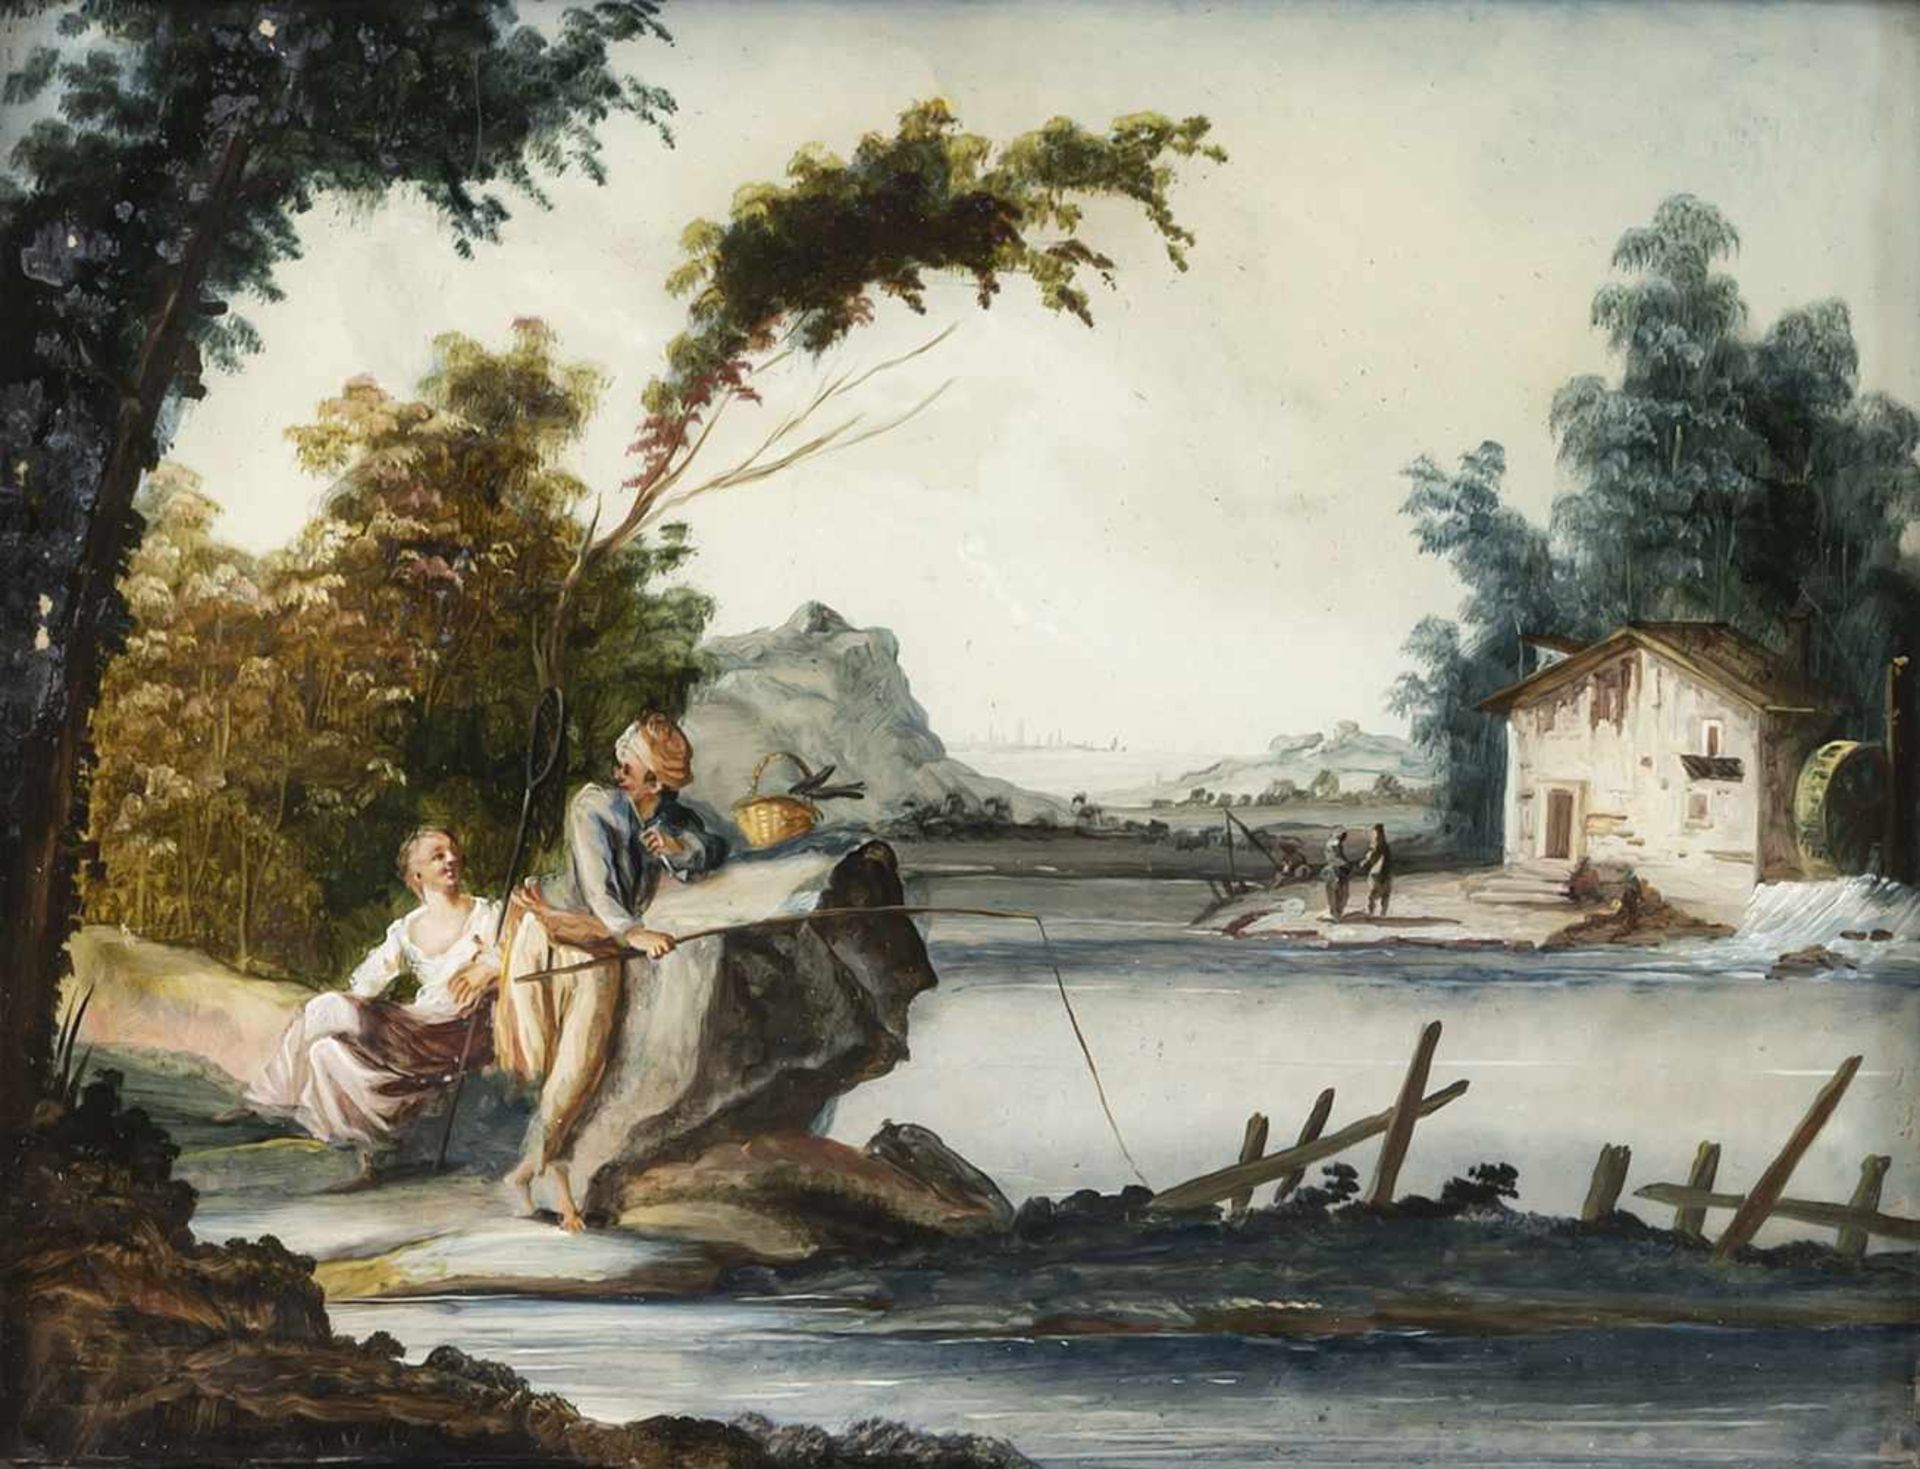 A GLASS PAINTING ON REVERSE, Augsburg, middle of 18th century. A fisher's couple in a river